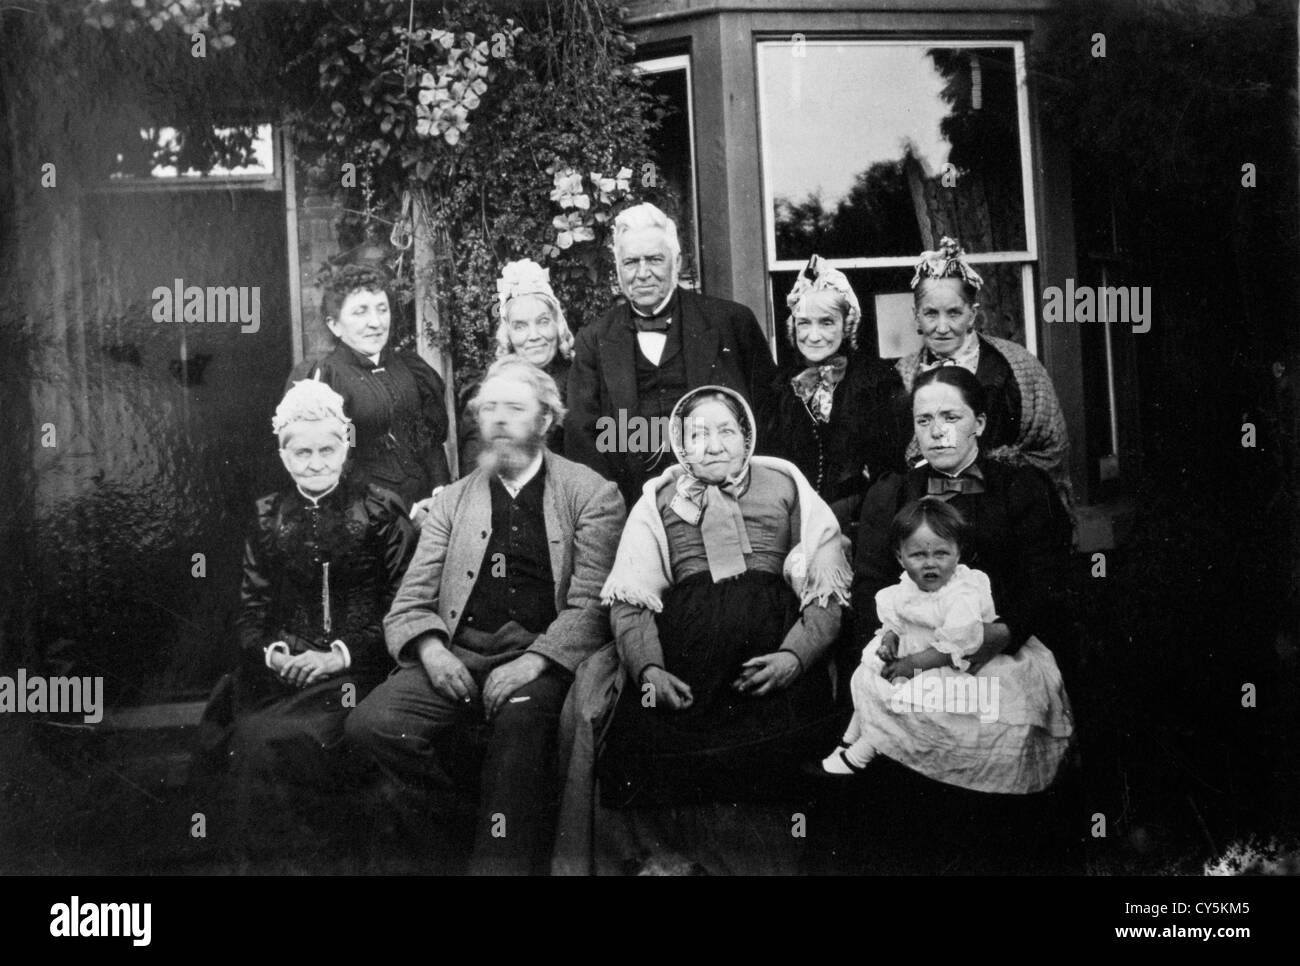 Victorian family group photographs Birmingham UK 1890s. Nine members of the same family and their family staff retainer.  They were timber merchants in Birmingham having moved from Huddersfield Yorkshire during the industrial revolution, where they had a school and were cloth merchants. Relatives of this content supplier. HOMER SYKES Stock Photo